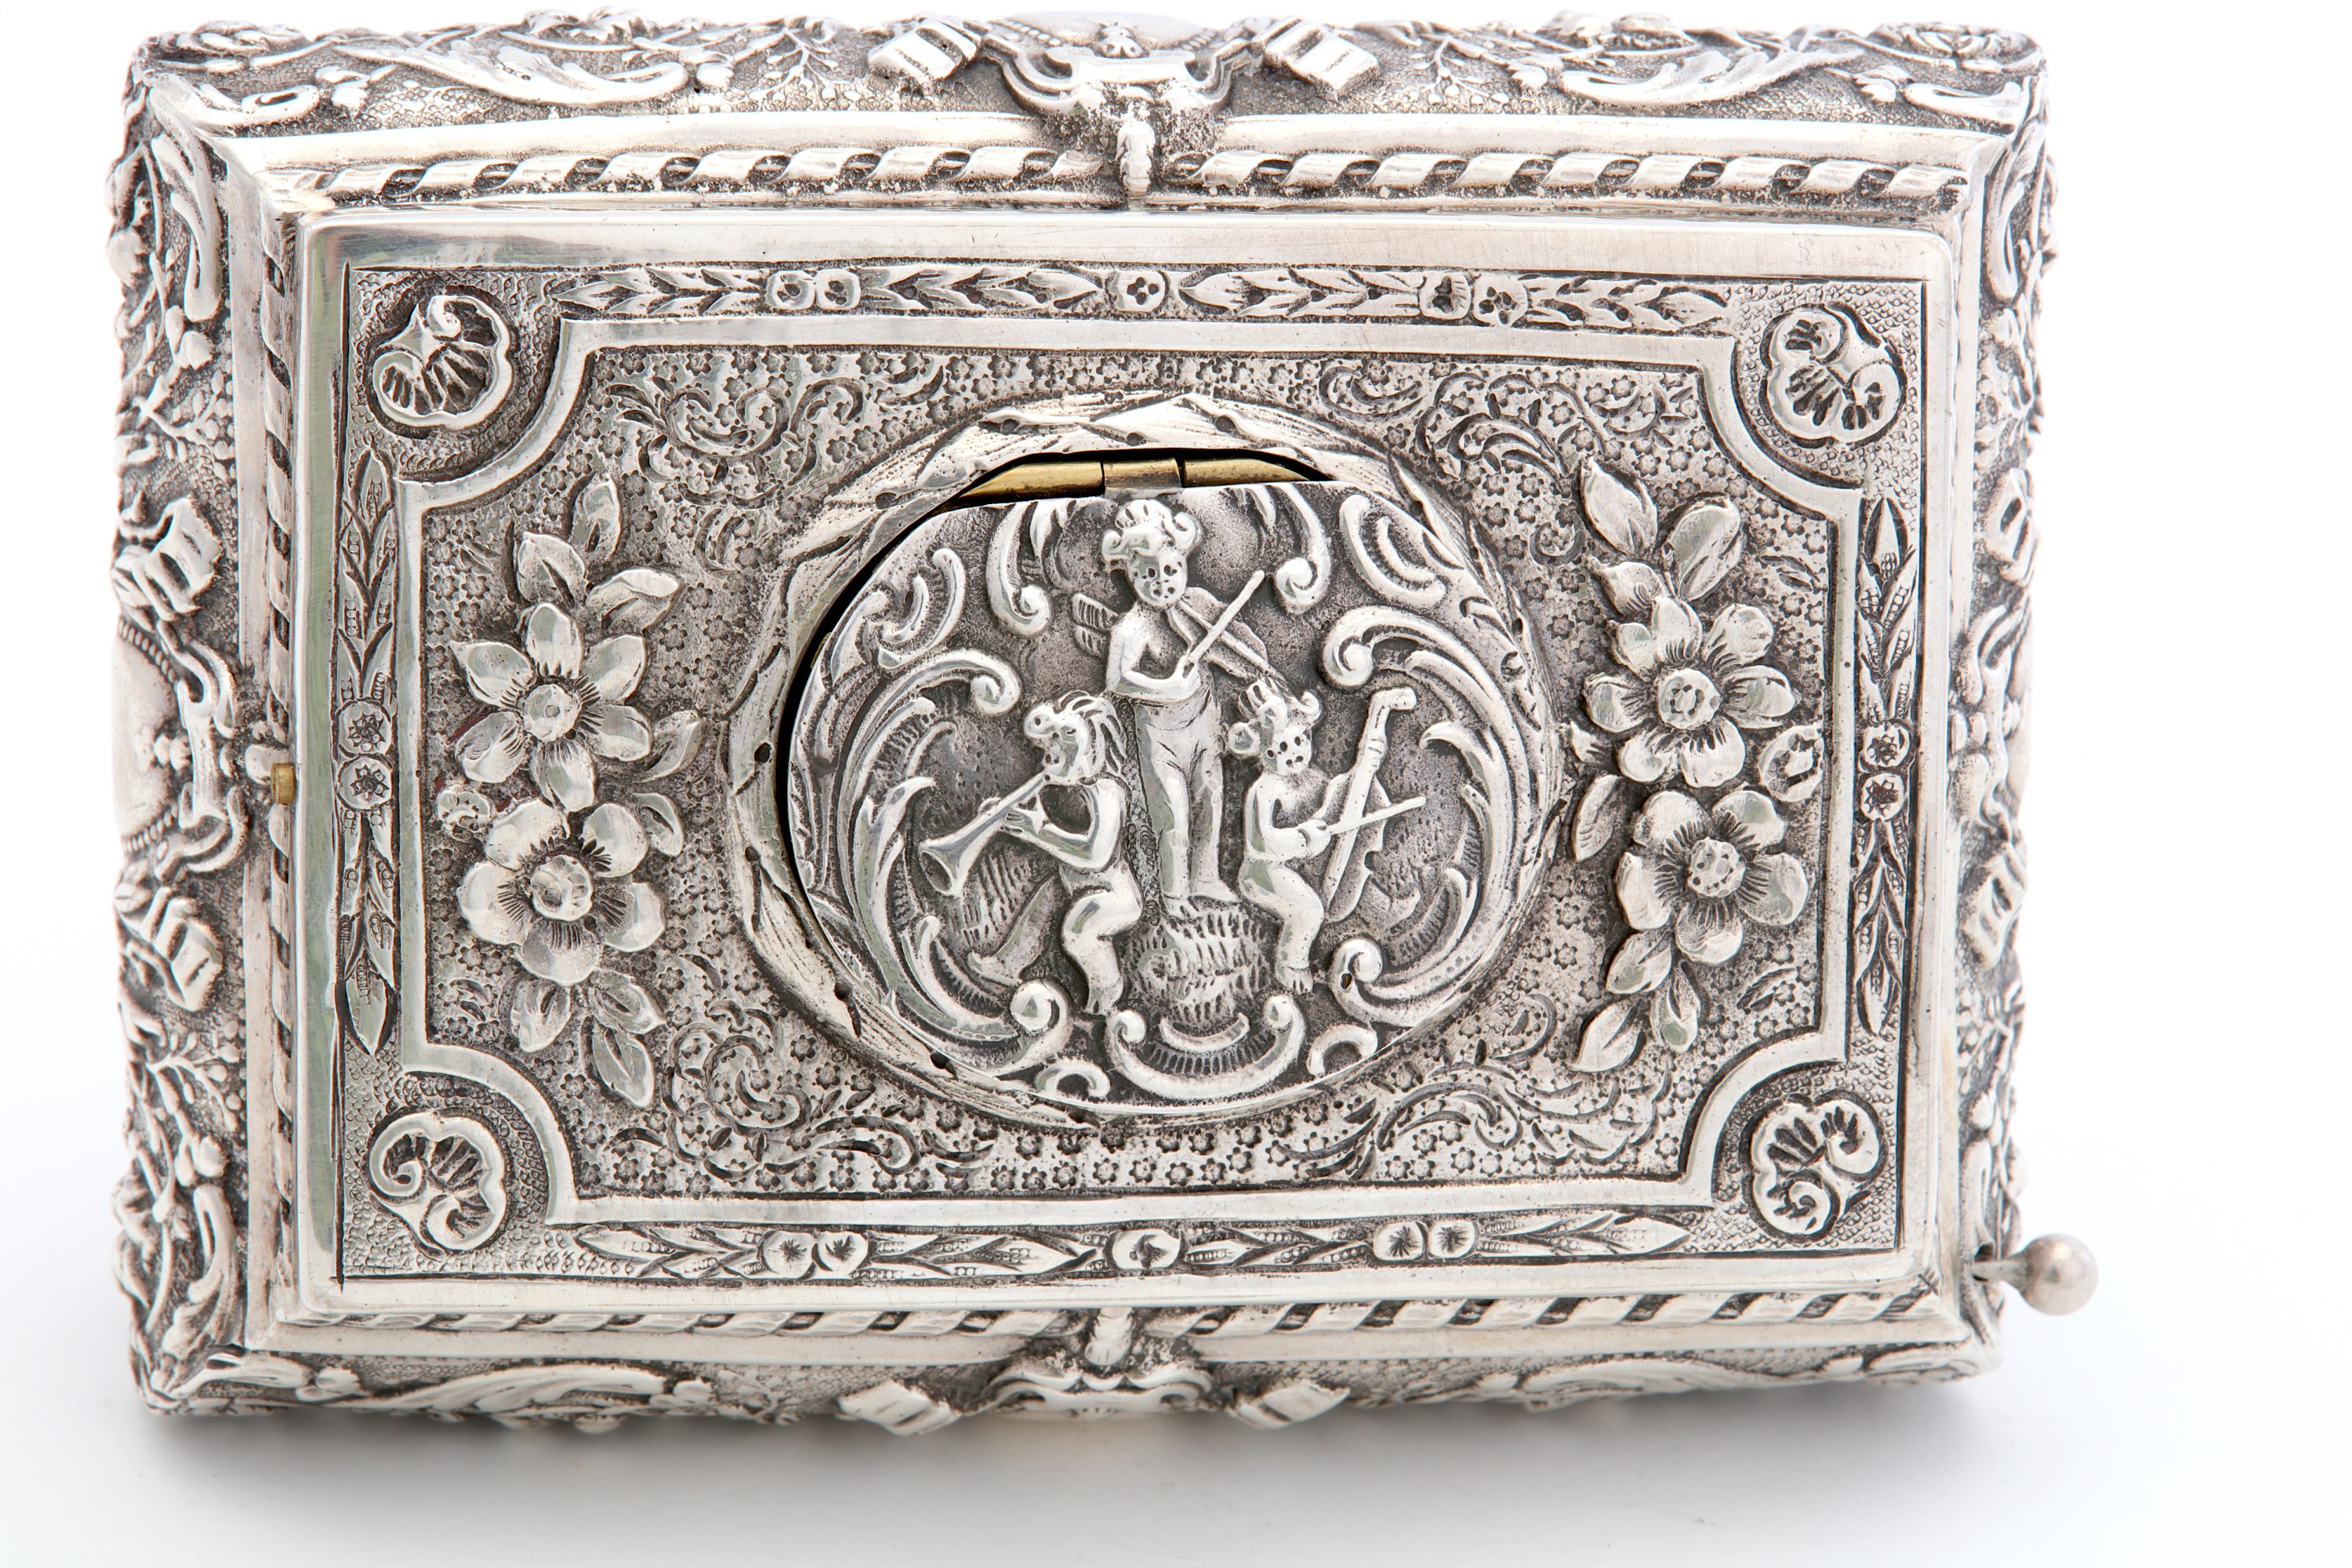 An early 20th century sterling silver singing bird box, by Karl Griesbaum circa 1920 - Image 3 of 6